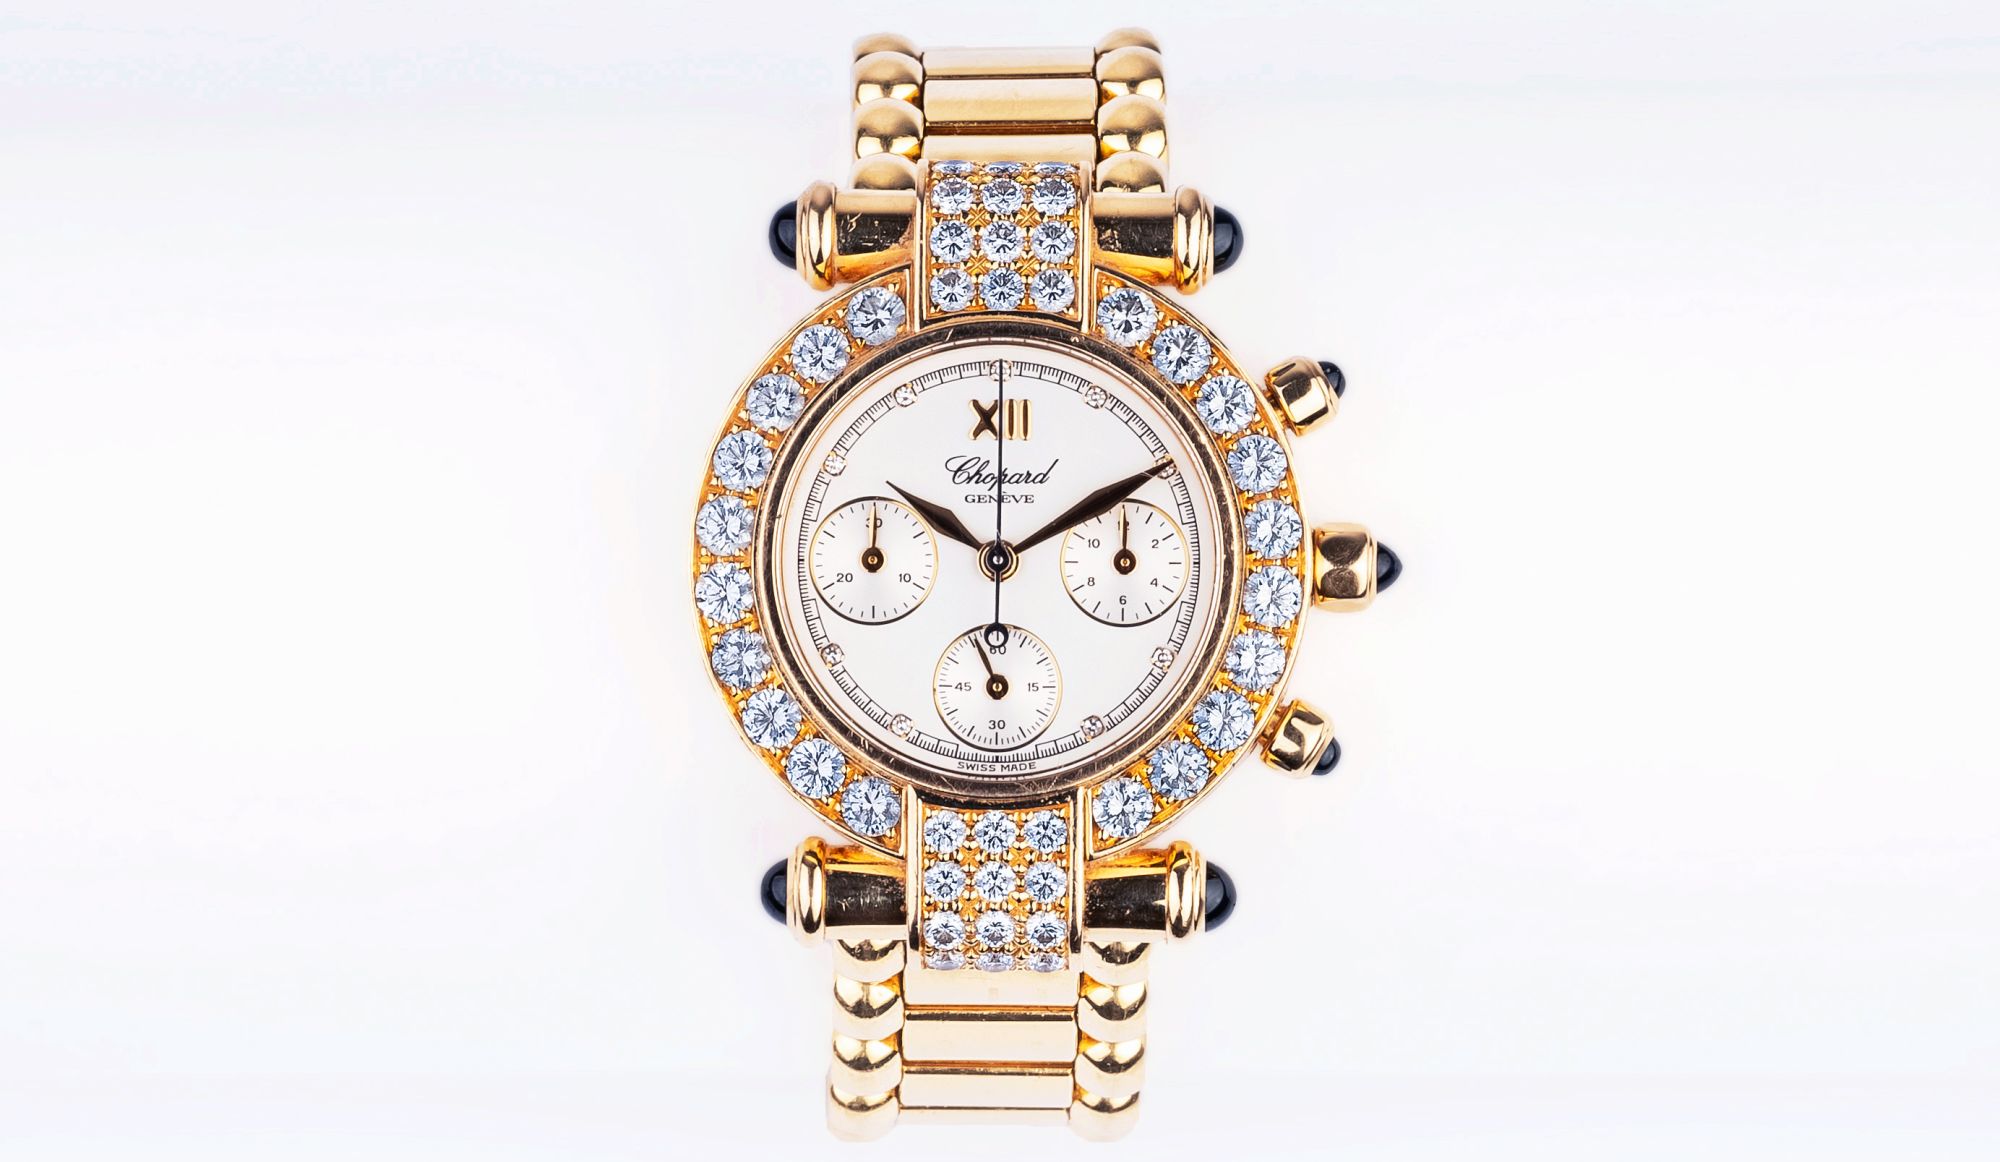 A Lady's Wristwatch Imperiale Chronograph with Diamonds